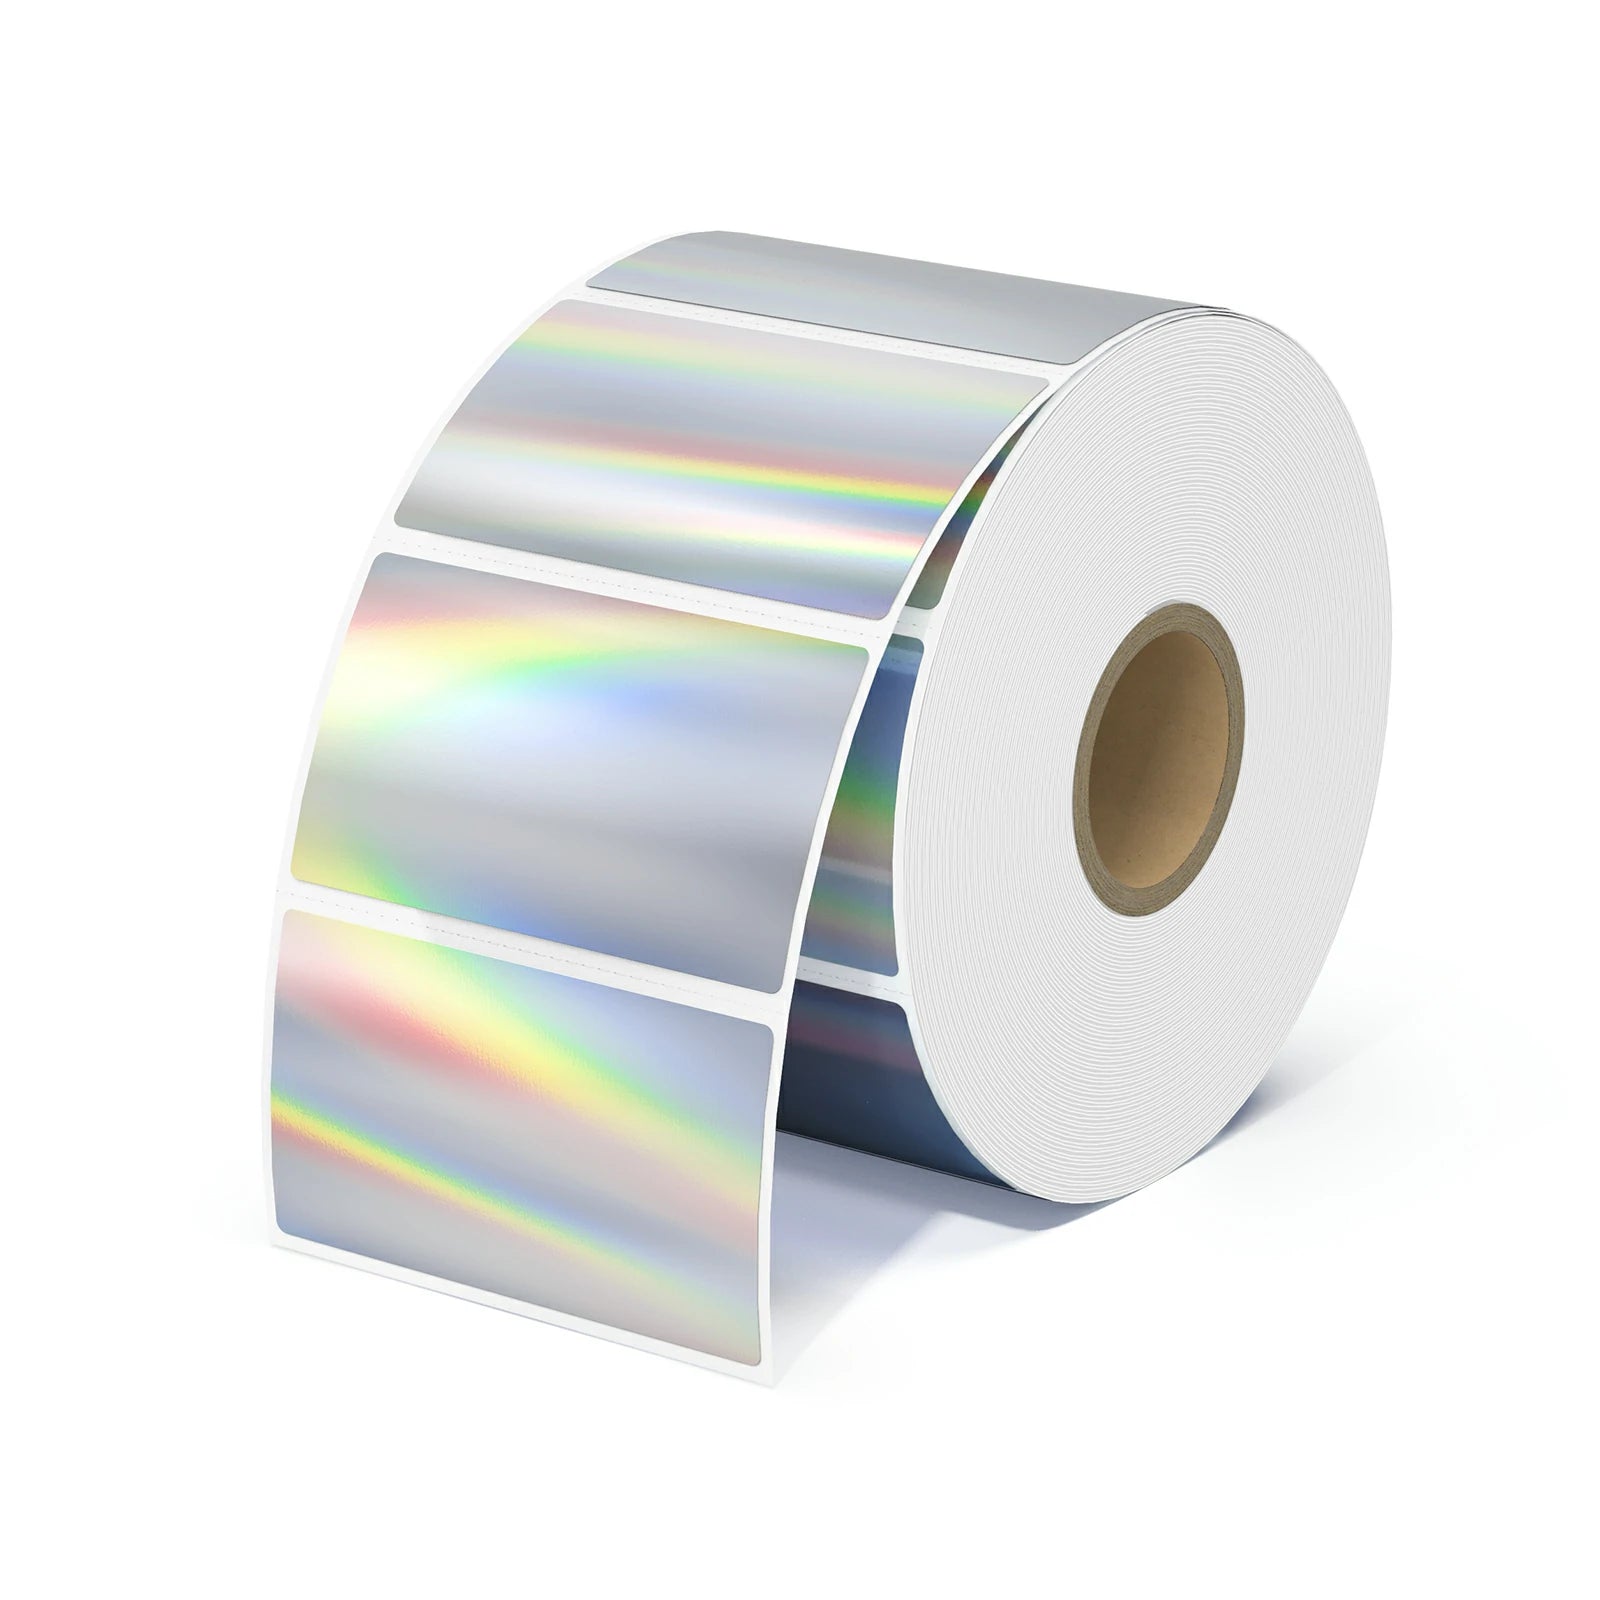 MUNBYN holographic silver rectangle thermal labels are 2.25